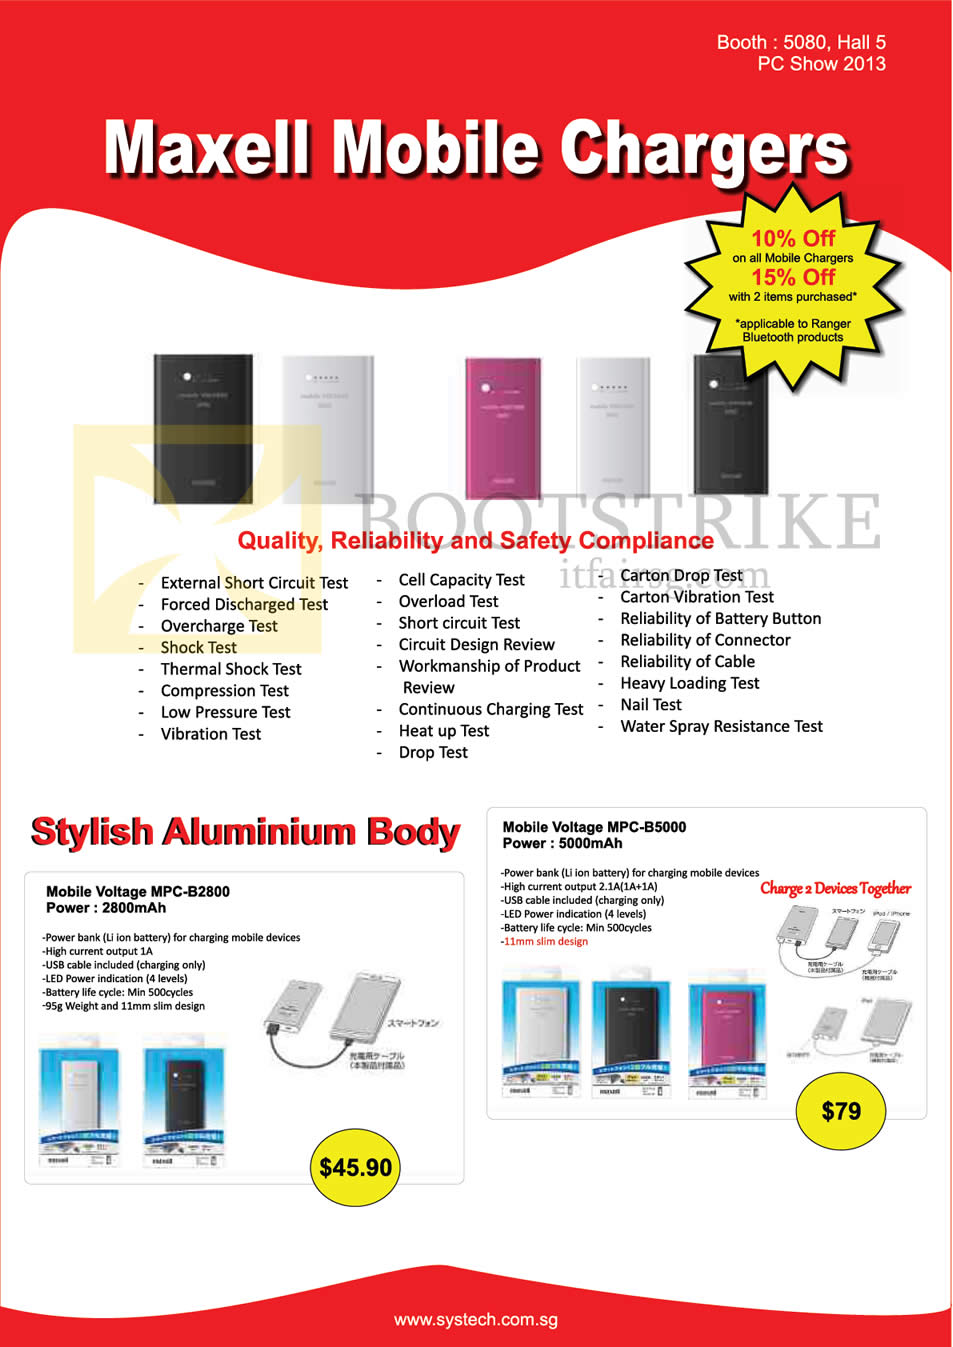 PC SHOW 2013 price list image brochure of Systems Tech Ranger Maxell Mobile Portable Chargers, MPC-B2800, MPC-B5000